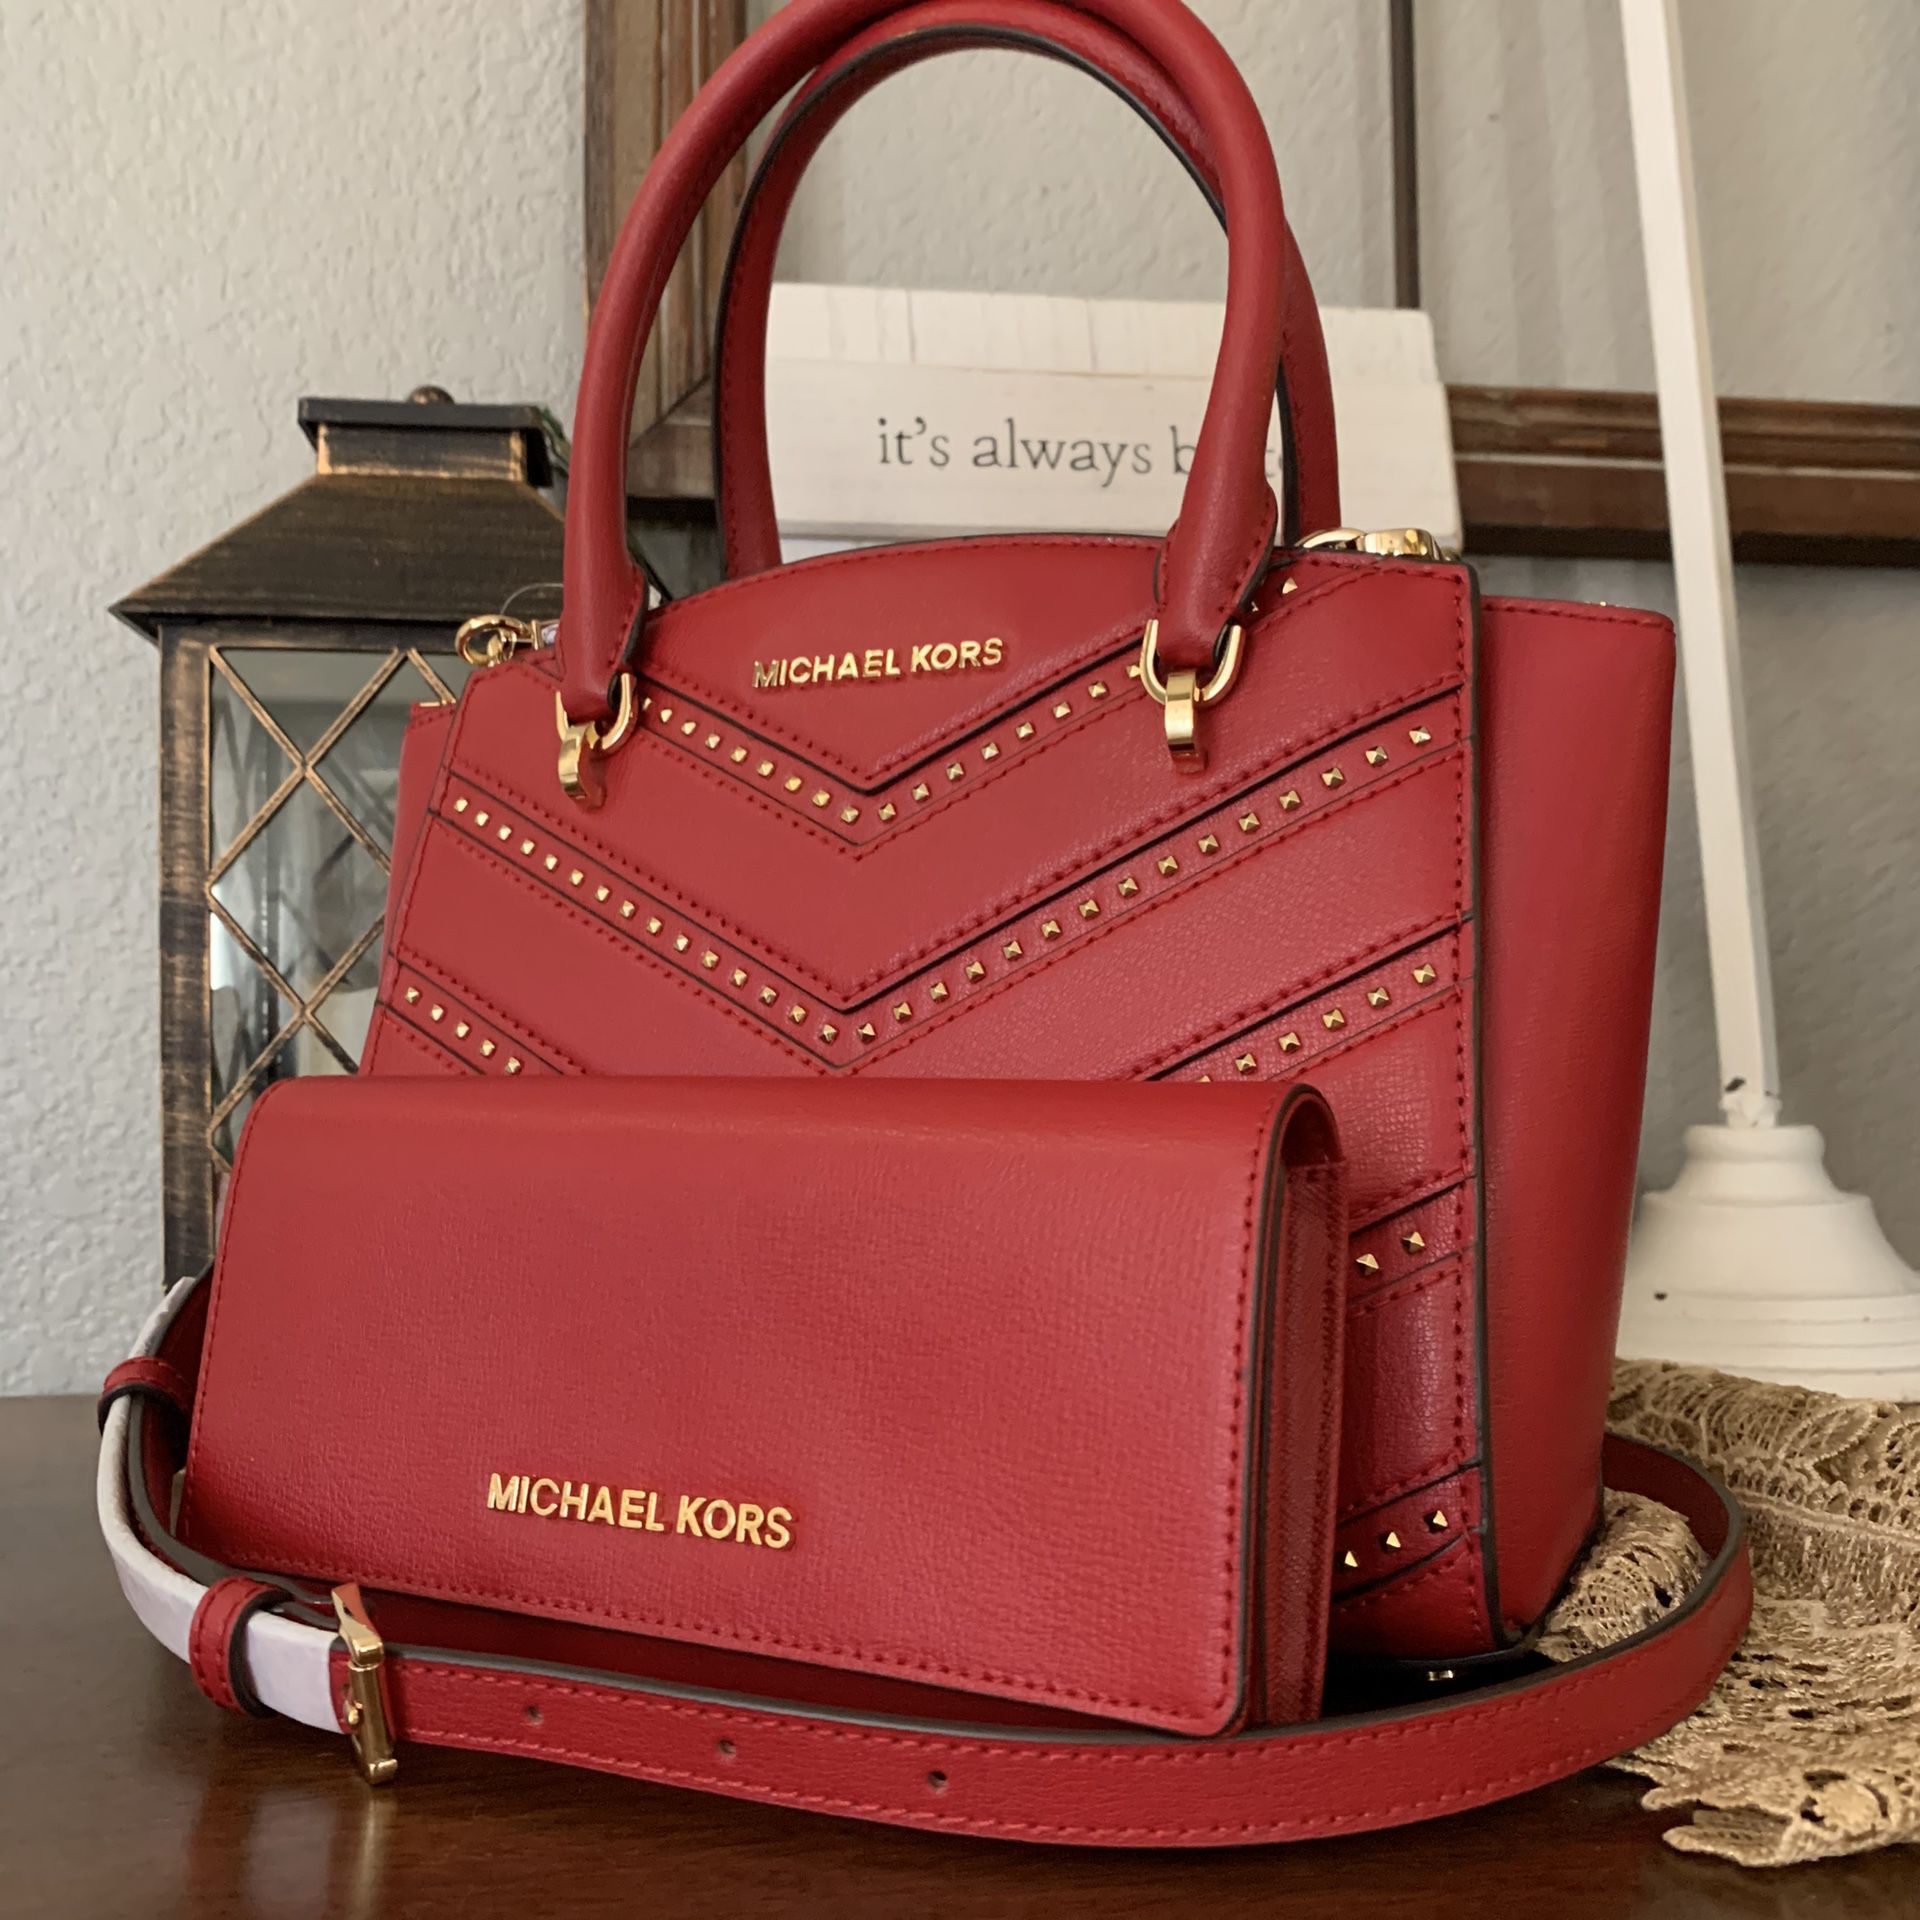 New MK red set price firm